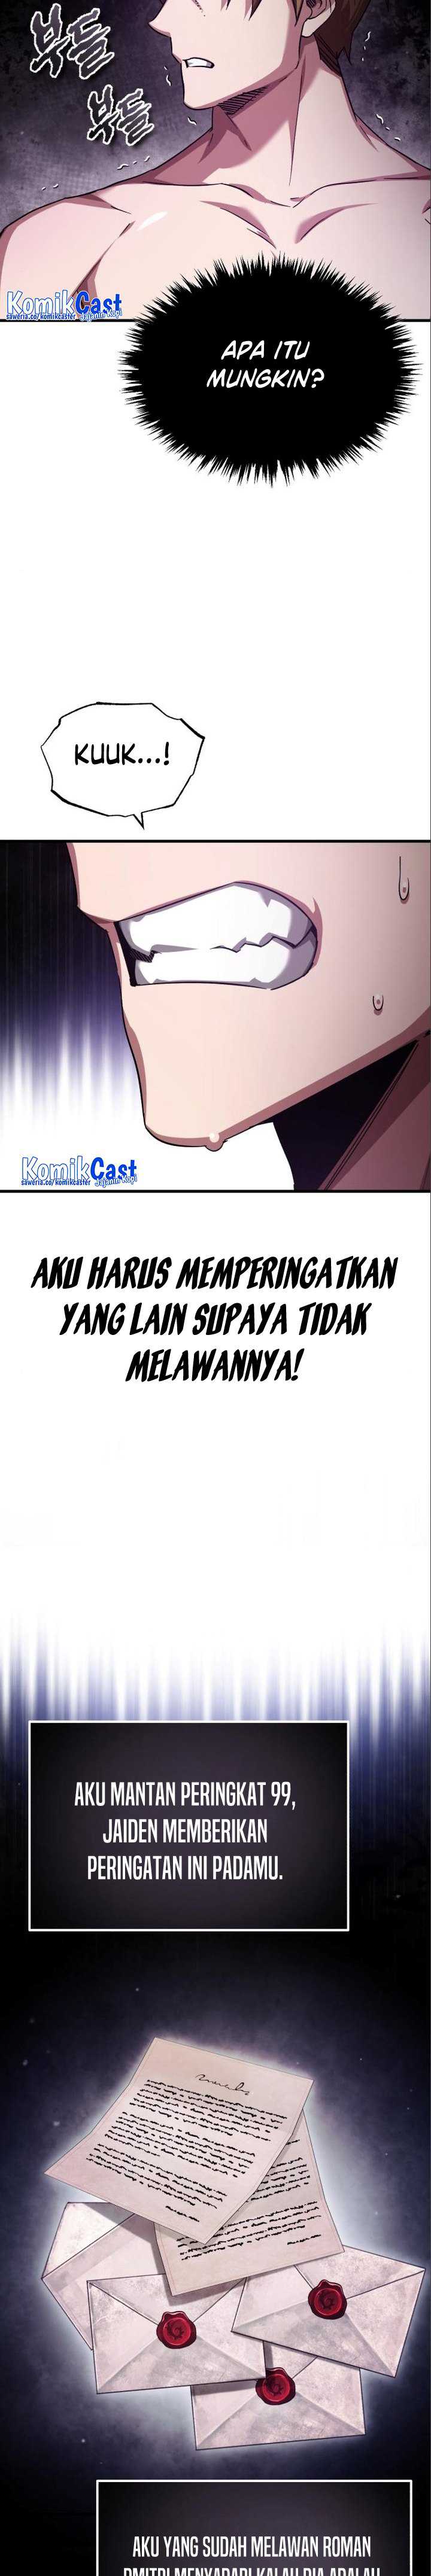 The Heavenly Demon Can’t Live a Normal Life Chapter 94